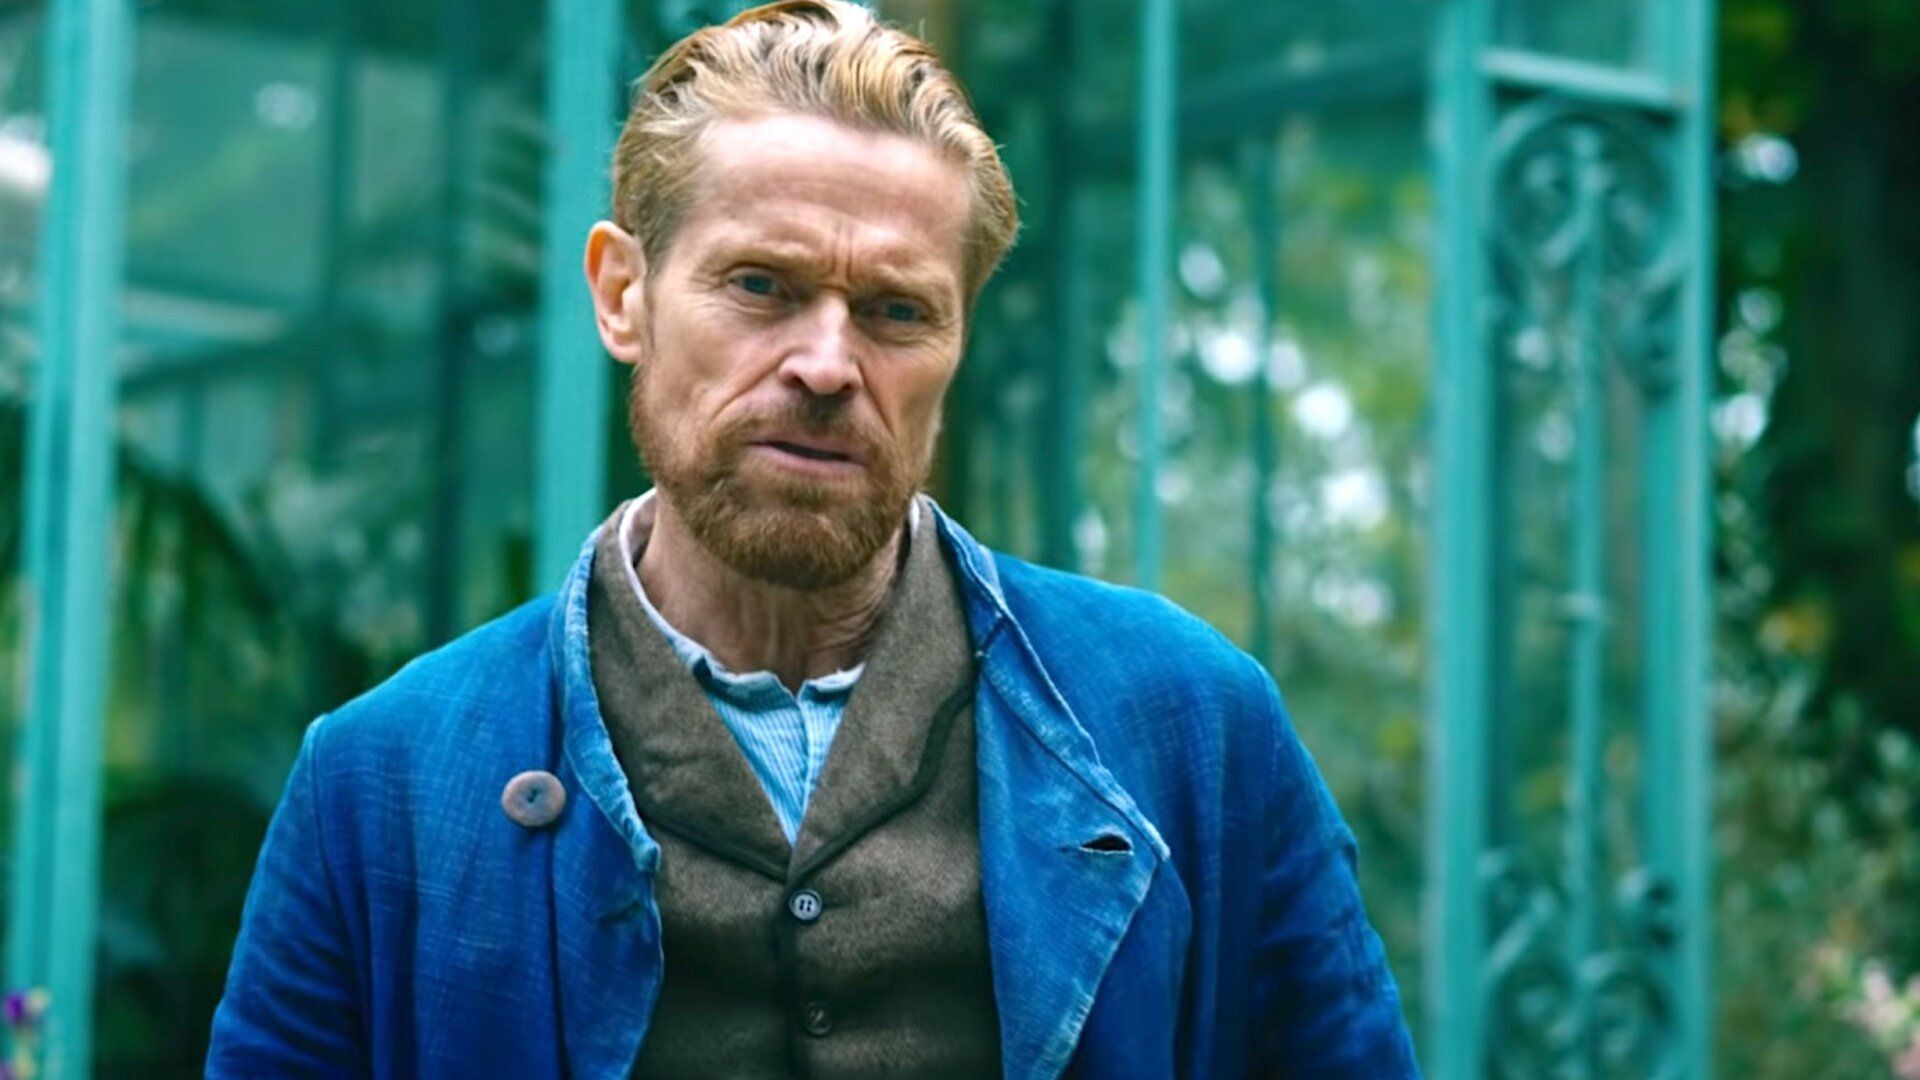 Willem Dafoe: The portrayal of Vincent van Gogh in biographical drama film At Eternity's Gate. 1920x1080 Full HD Background.